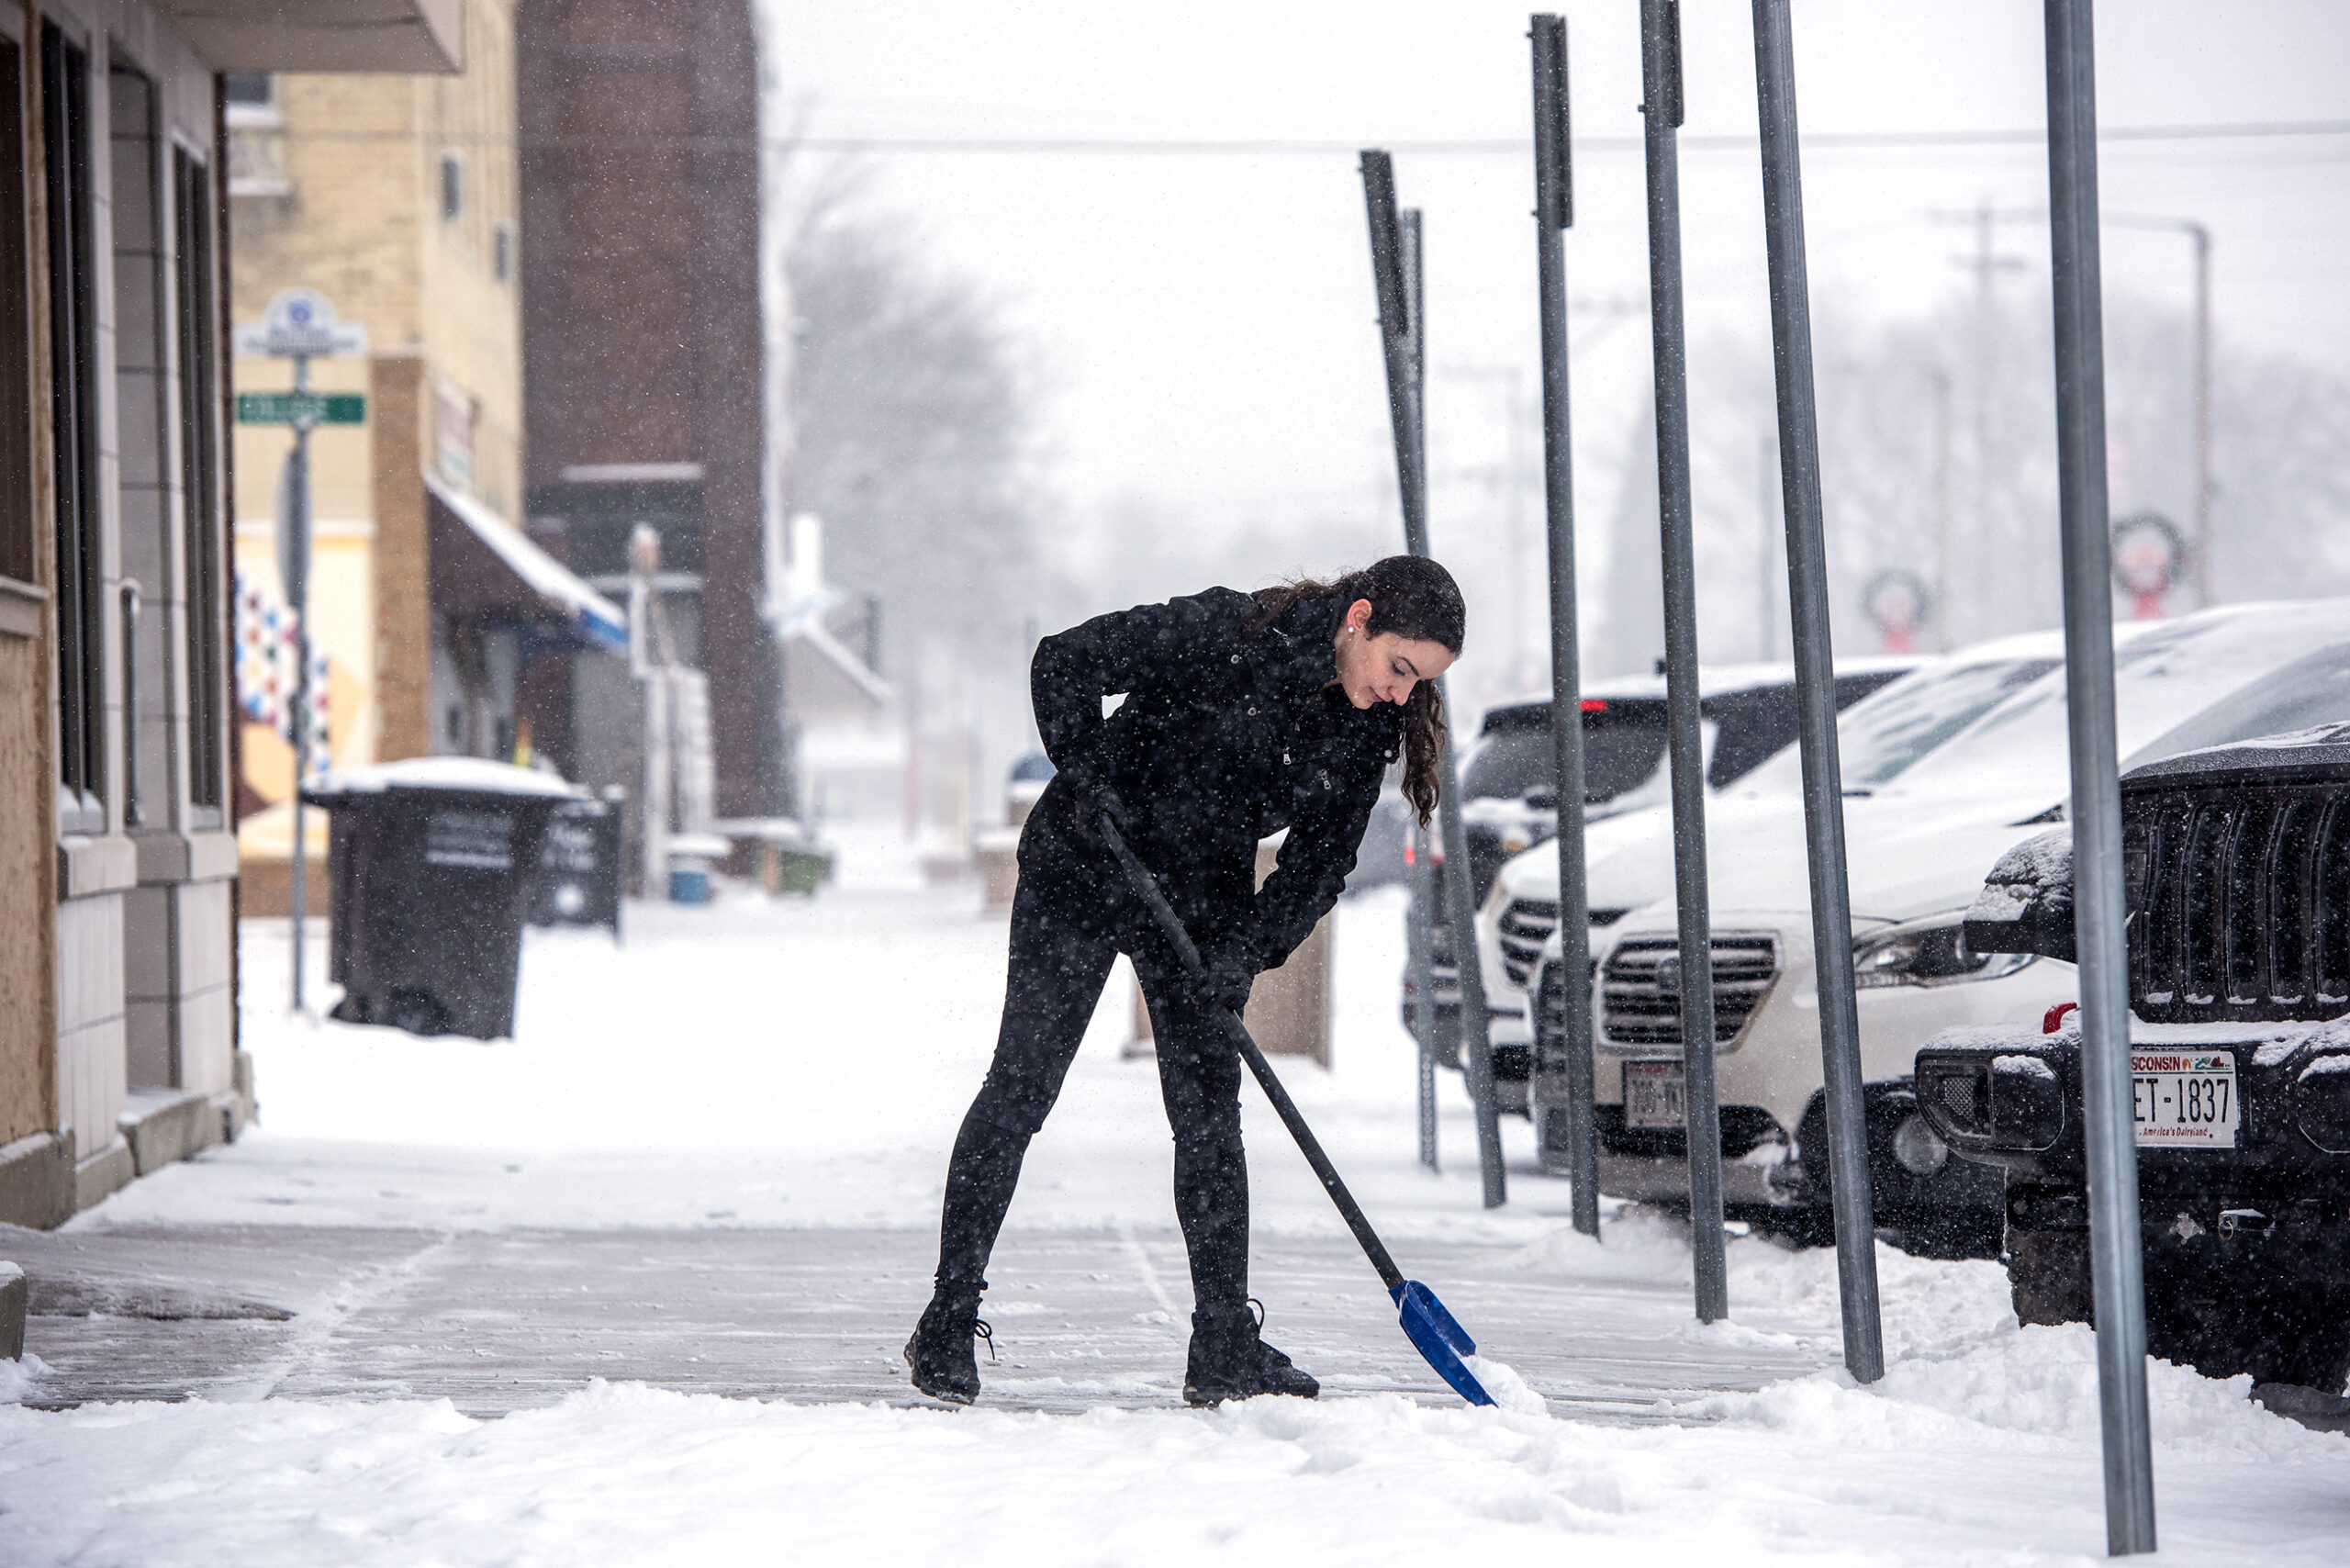 A woman in a coat and boots uses a shovel to clear snow from a downtown sidewalk.